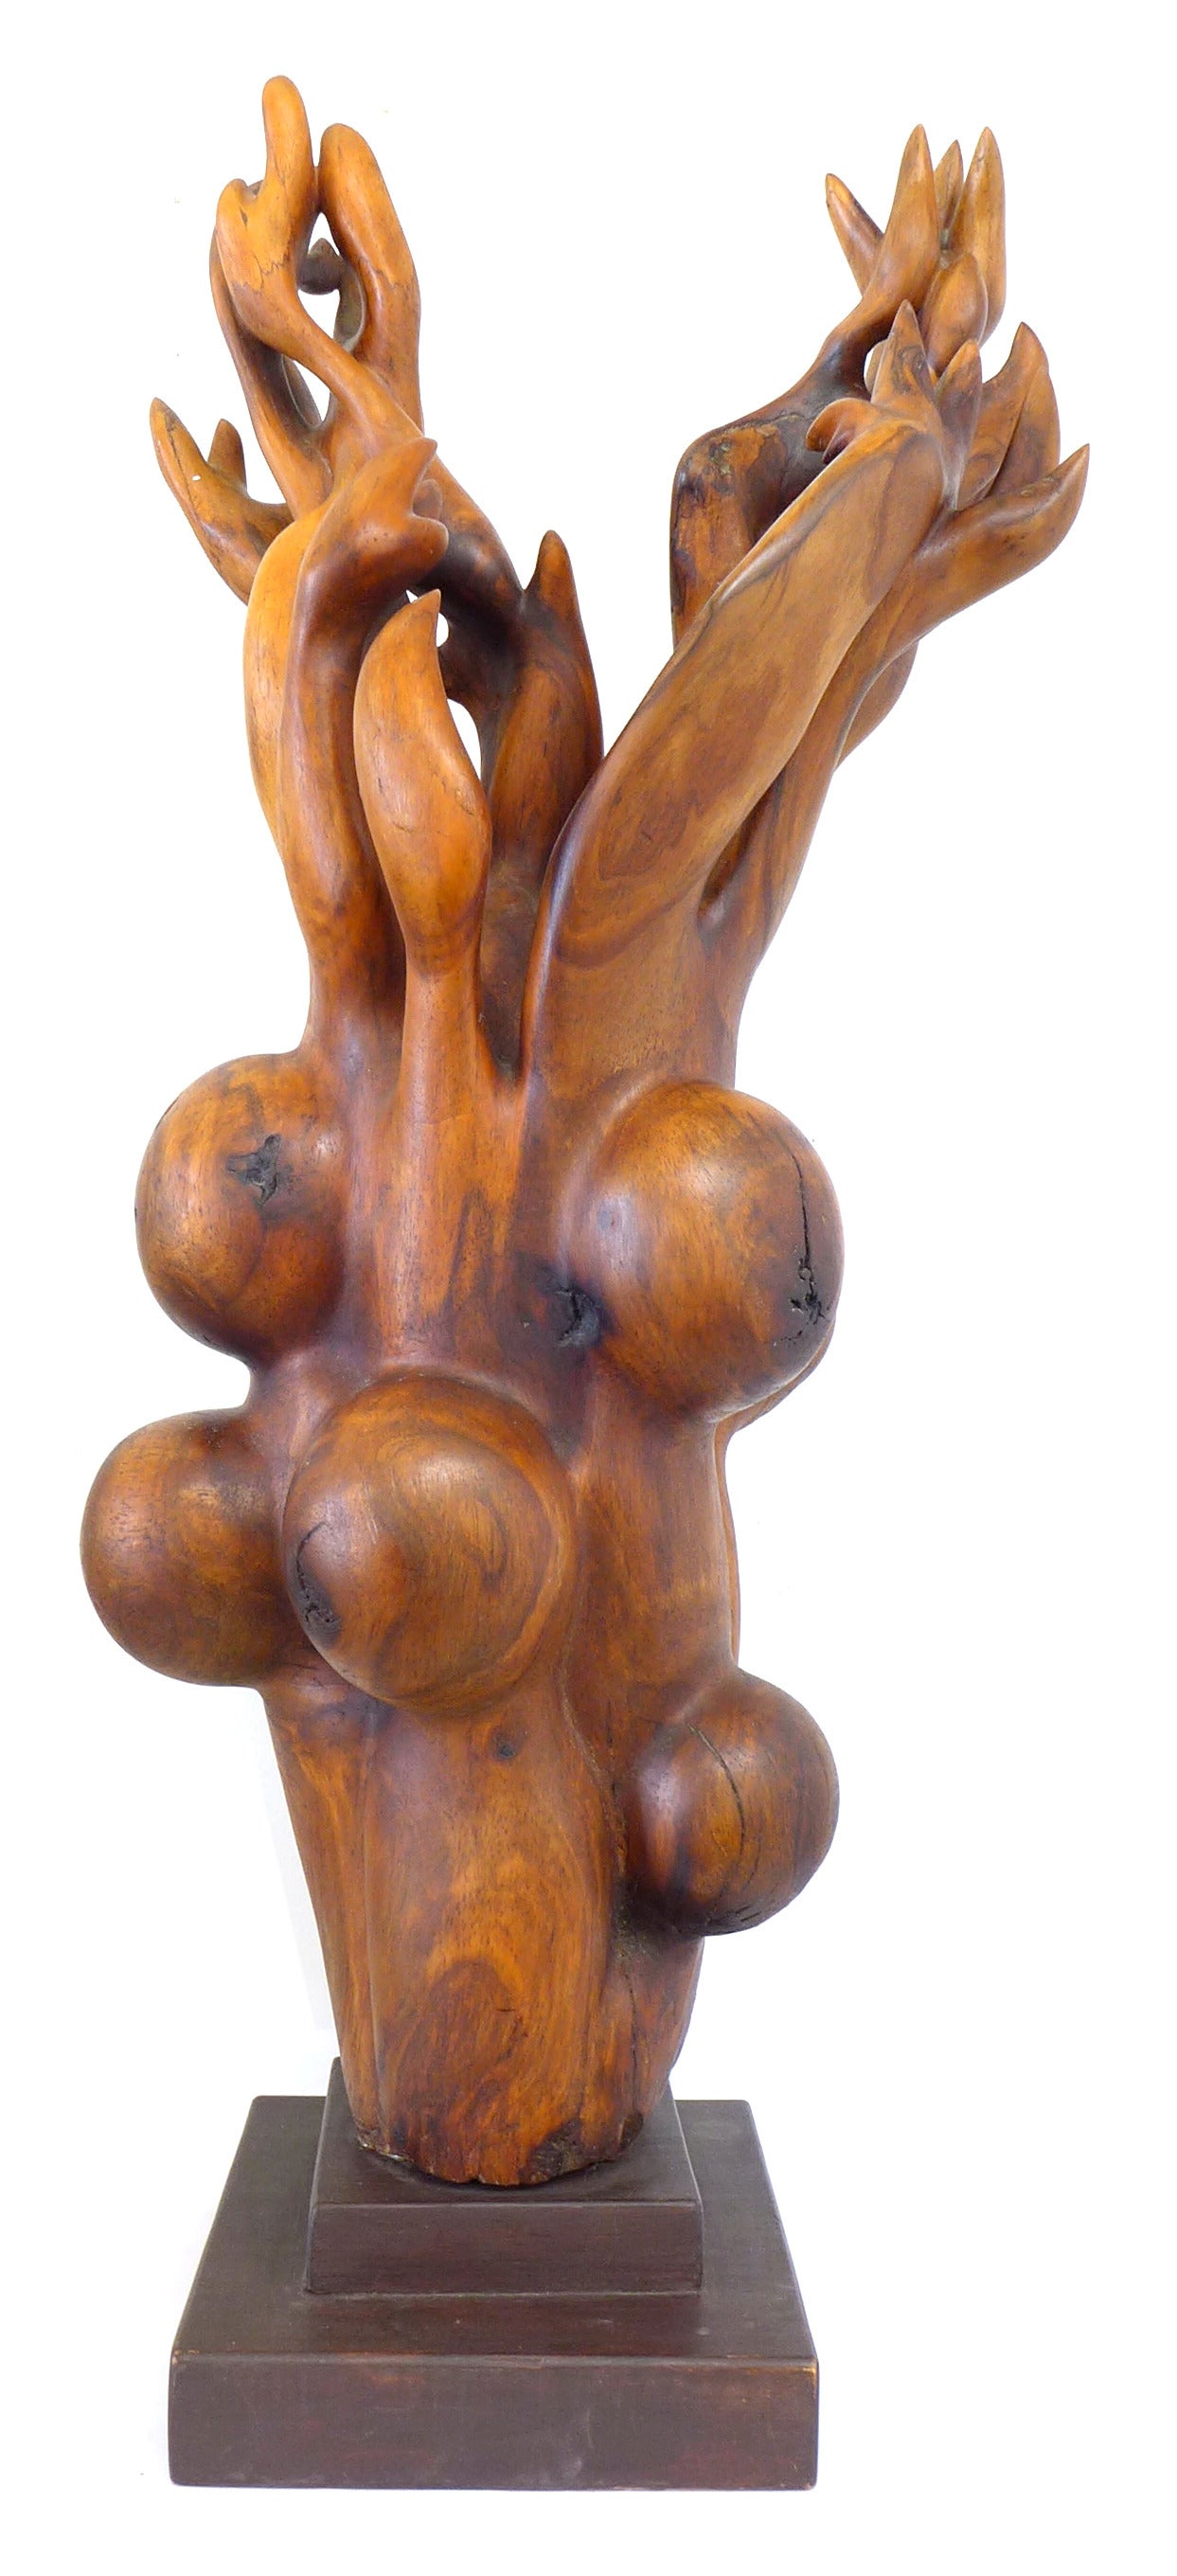 Extraordinary Biomorphic Carved Wood Sculpture by Robin Spry Campbell